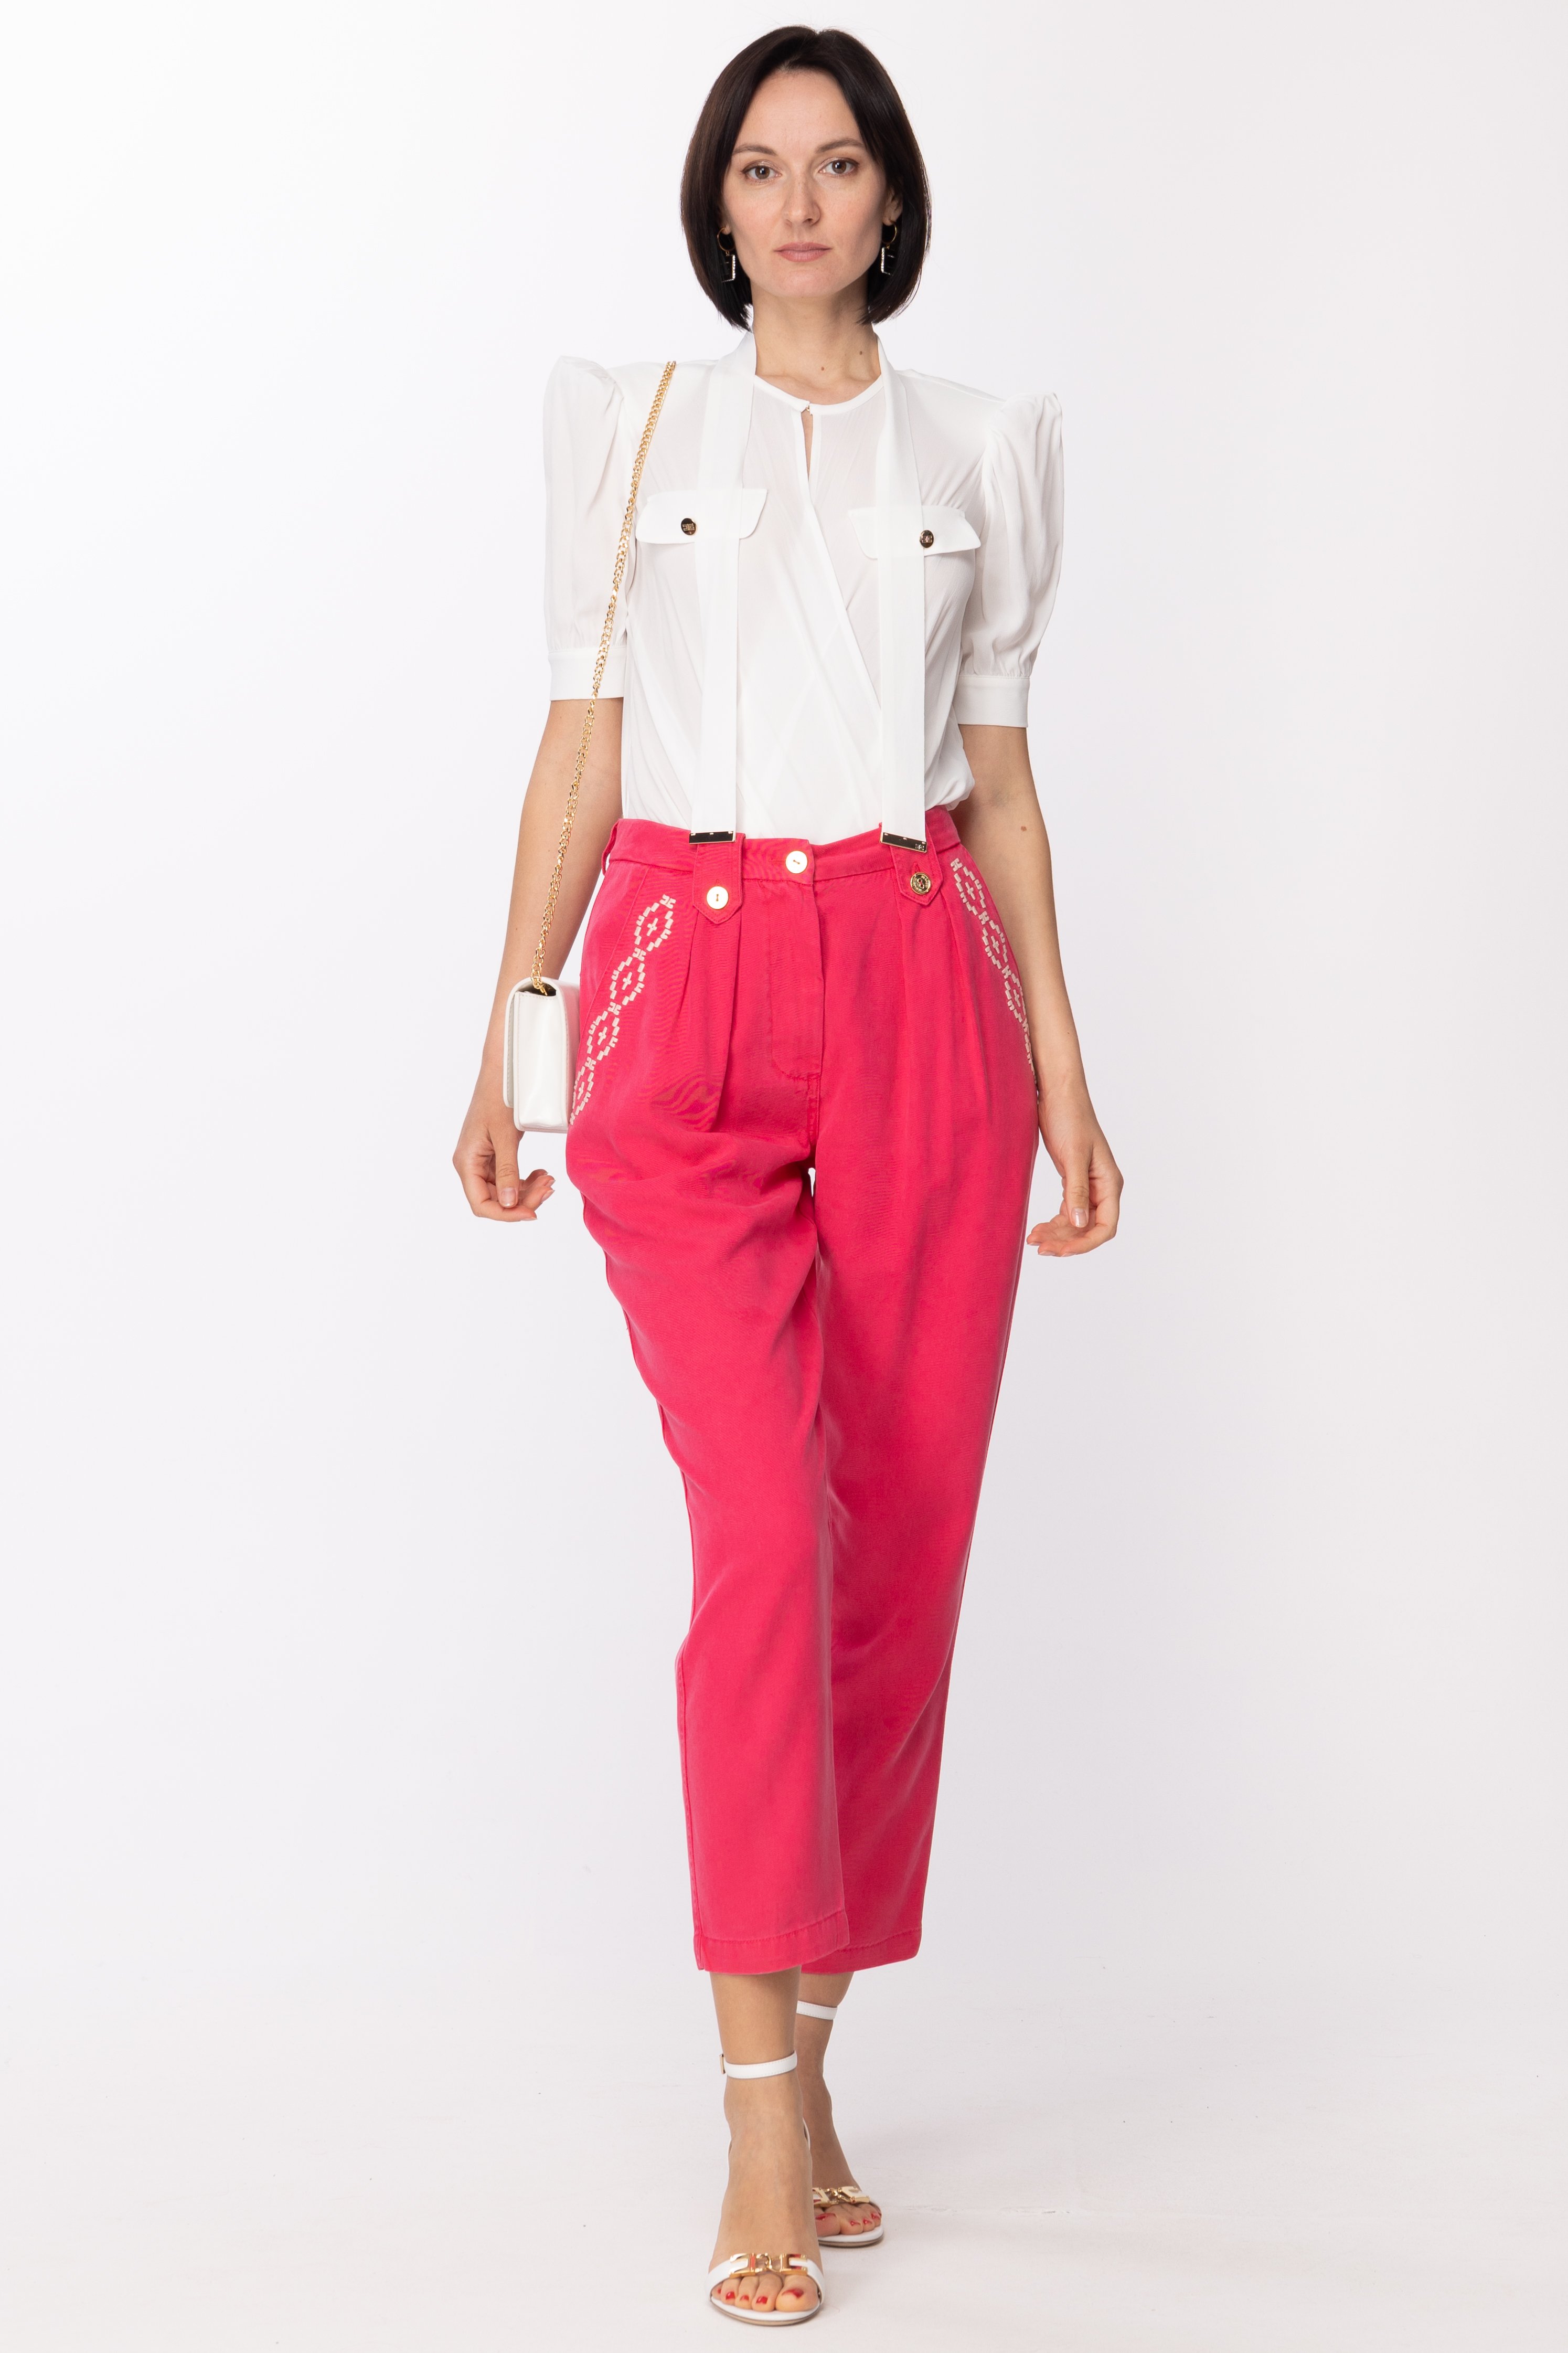 Preview: Elisabetta Franchi Cigarette trousers with embroidery on pockets Fuxia/Burro